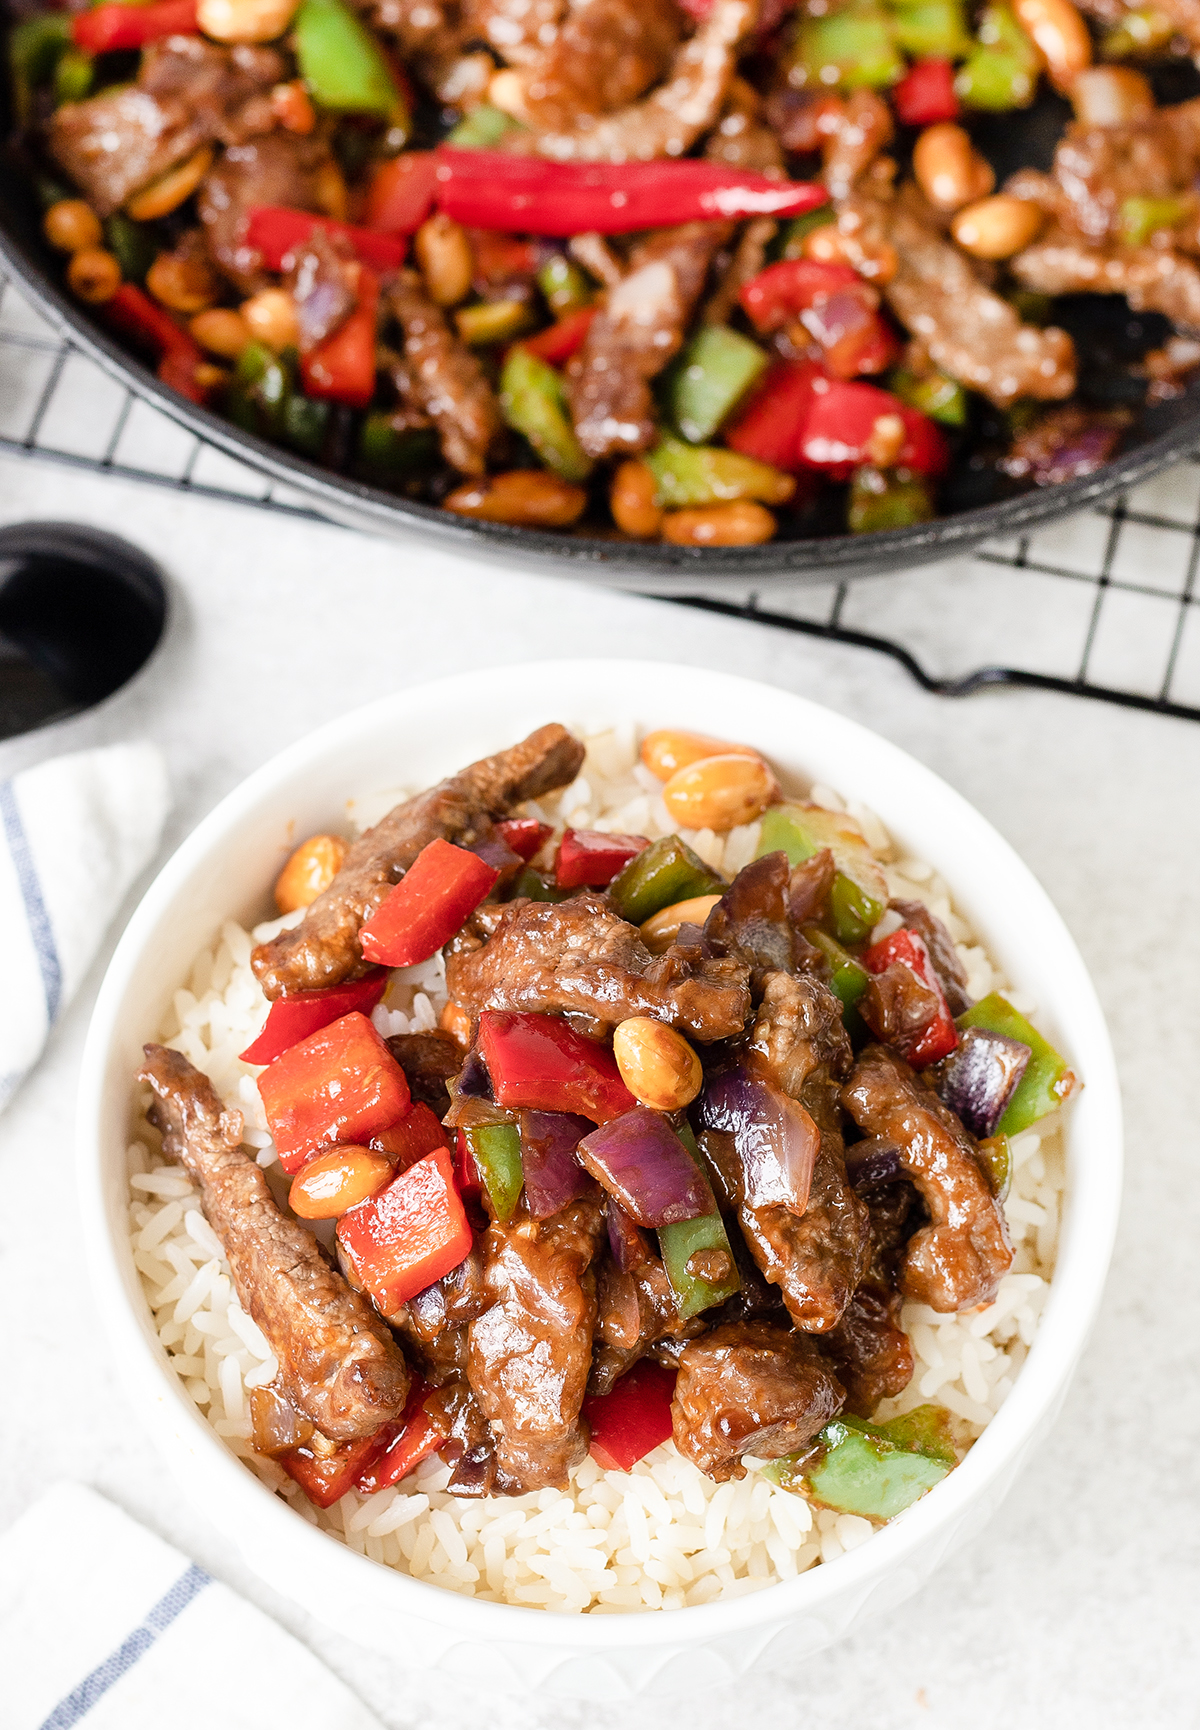 Kung Pao Beef is a Chinese stir fry dish